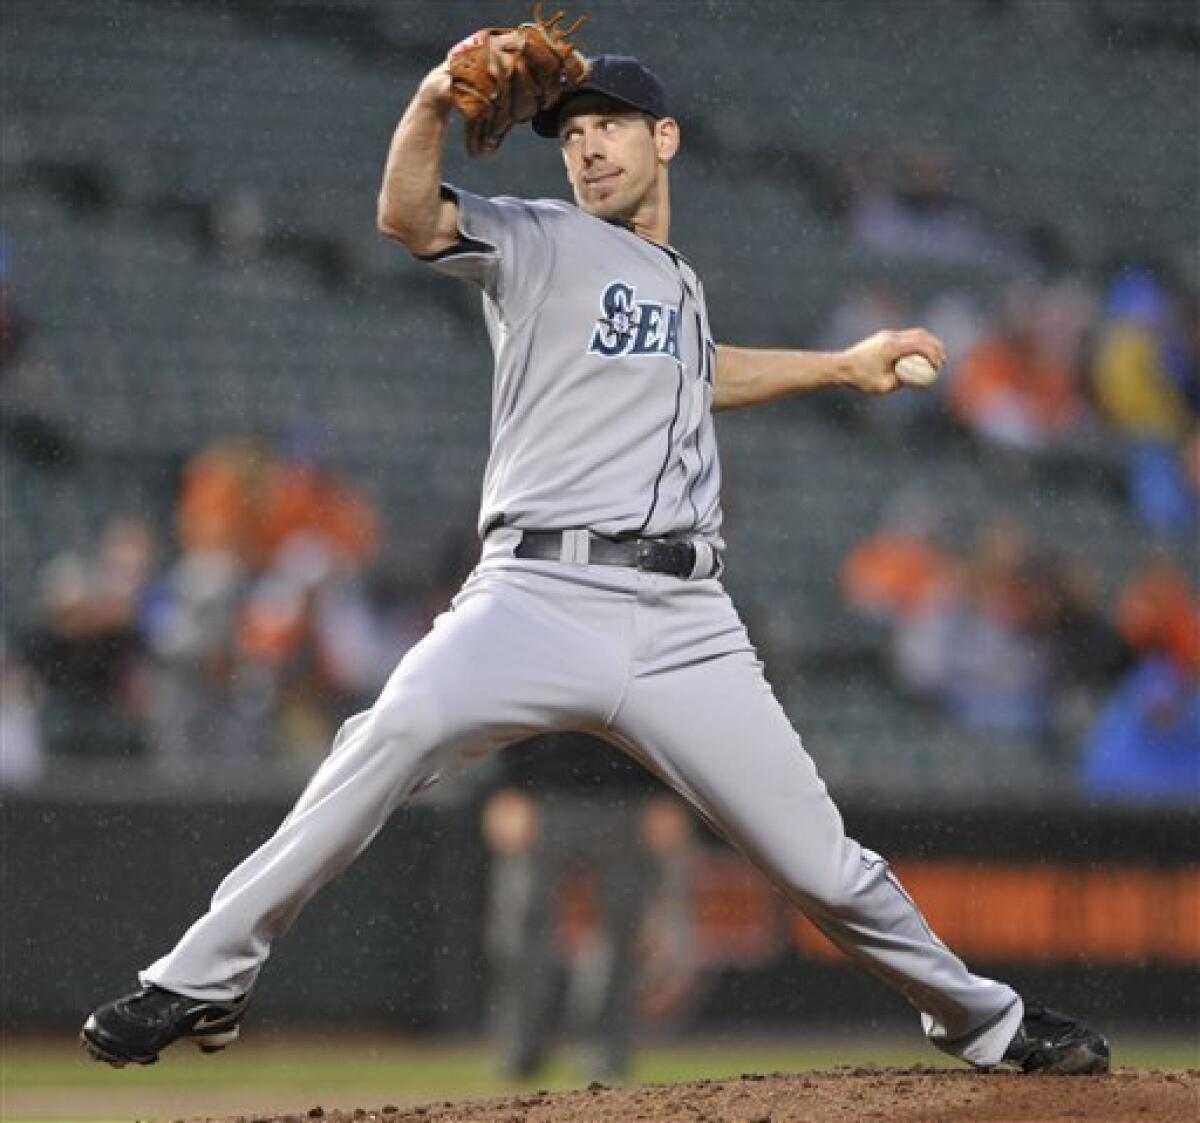 Lee earns first win, Mariners beat Orioles 5-1 - The San Diego Union-Tribune